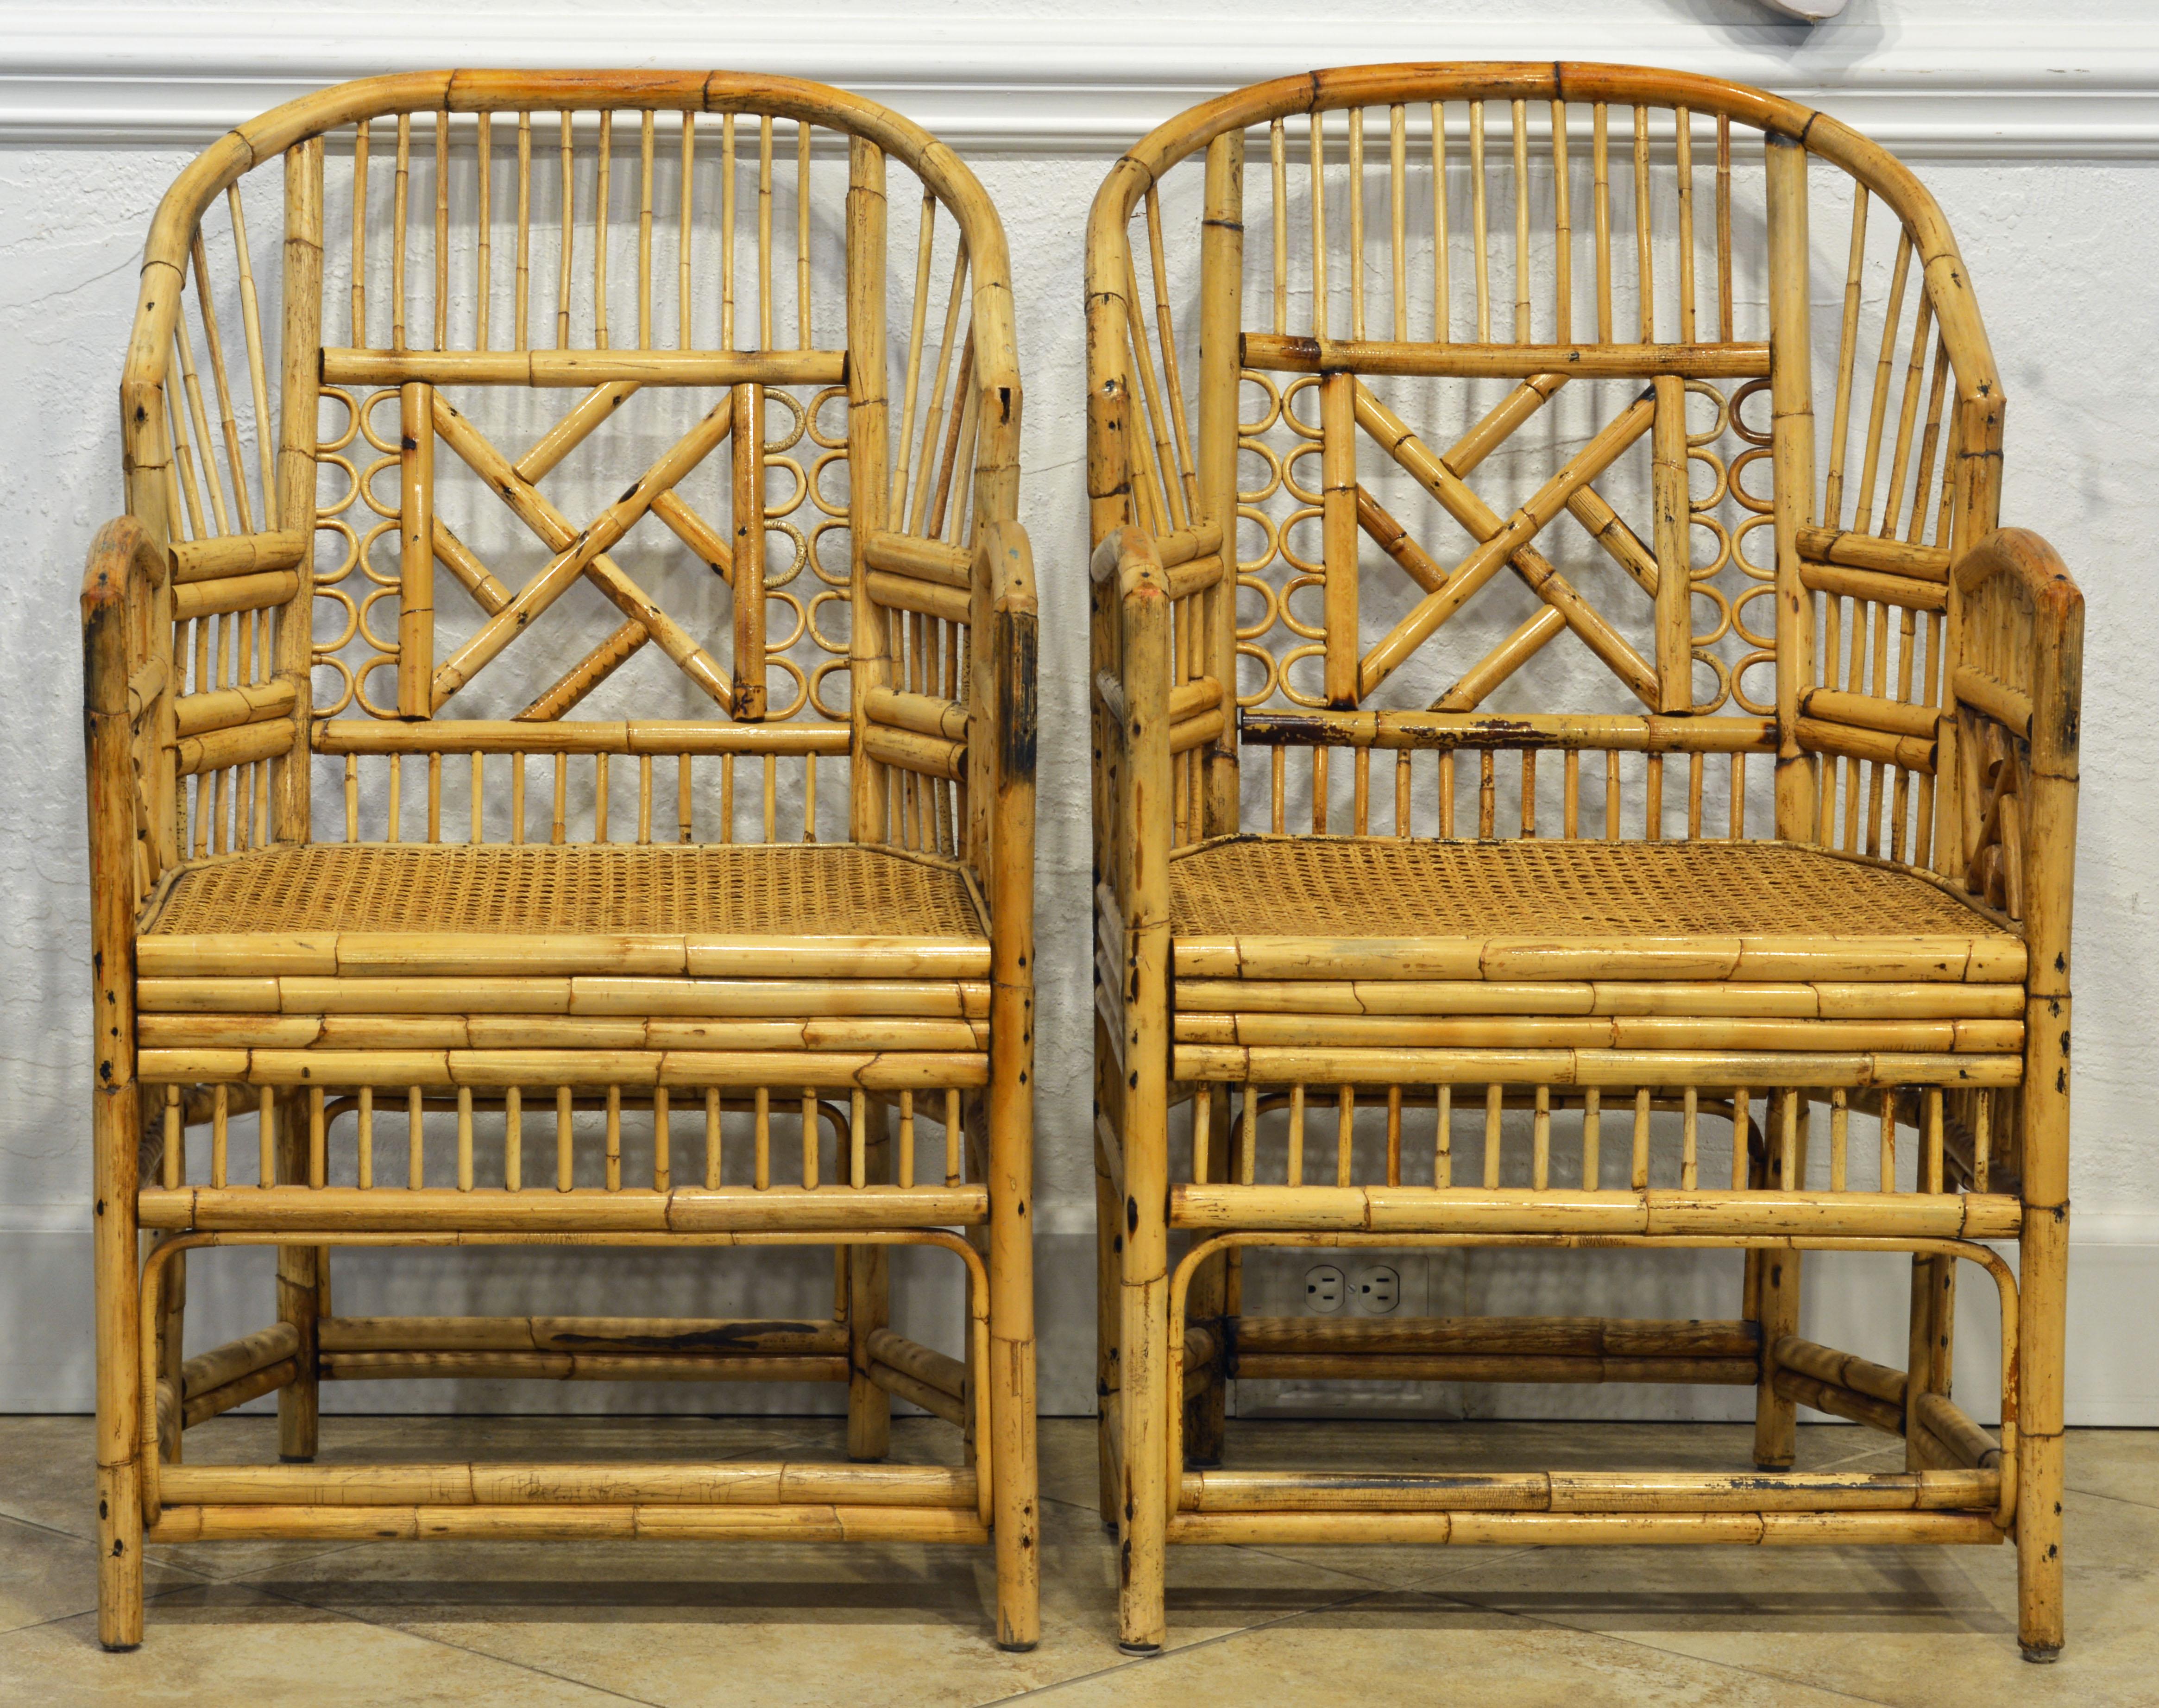 Rising on six legs these intricately crafted iconic vintage armchairs with cane seats of an extra large size feature bamboo frames and Chinese themed bamboo open work inspired by Chippendale design. The larger size and the bold handcrafted style add